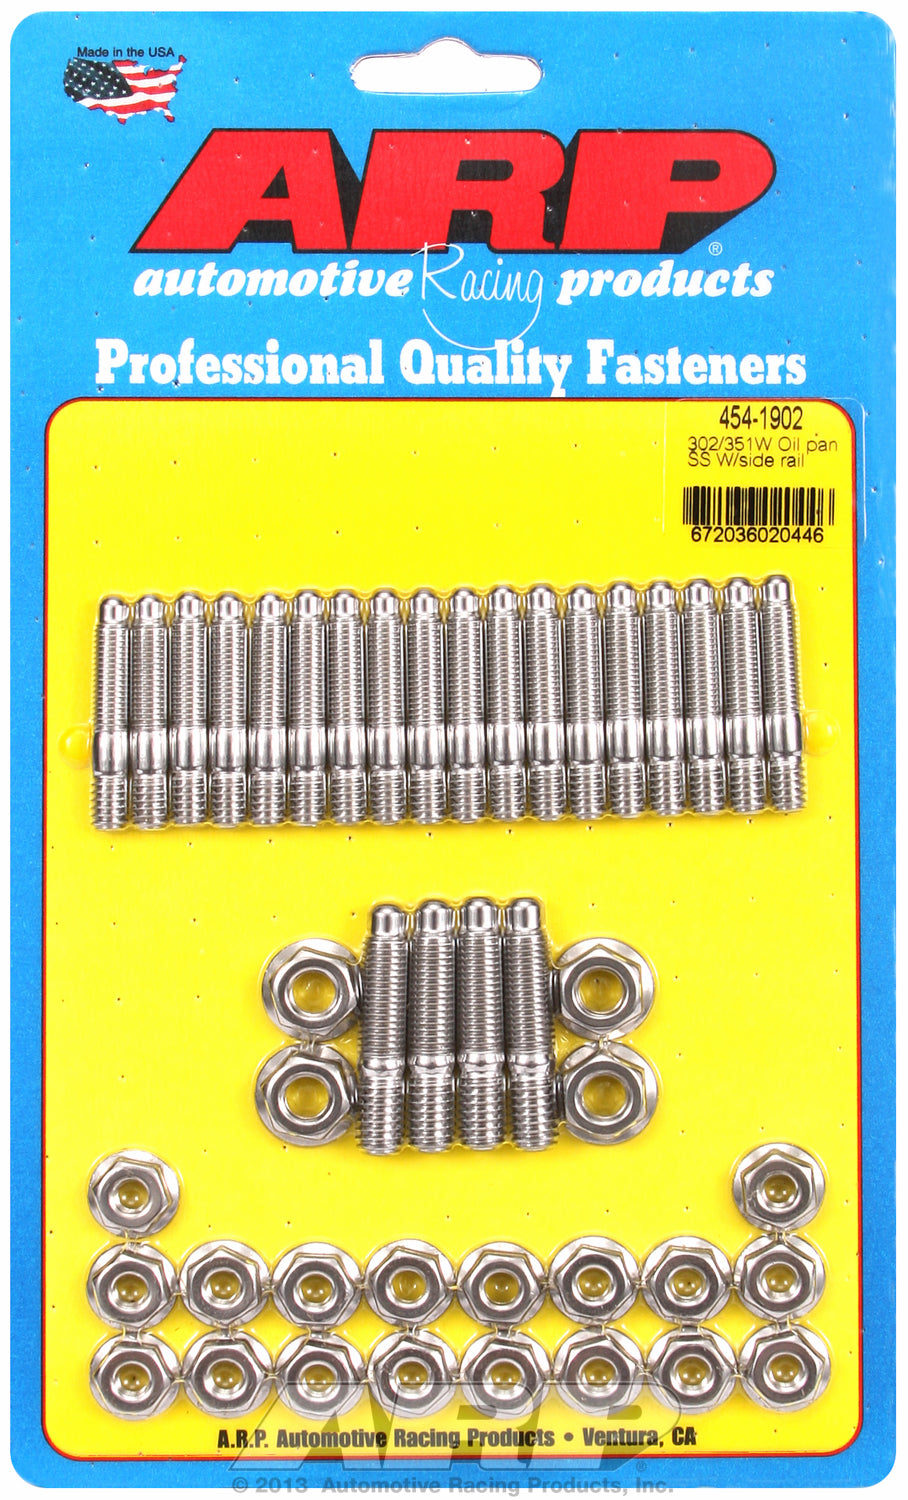 Hex Head Stainless Oil Pan Stud Kit for Ford 302-351W (late model with side rails)